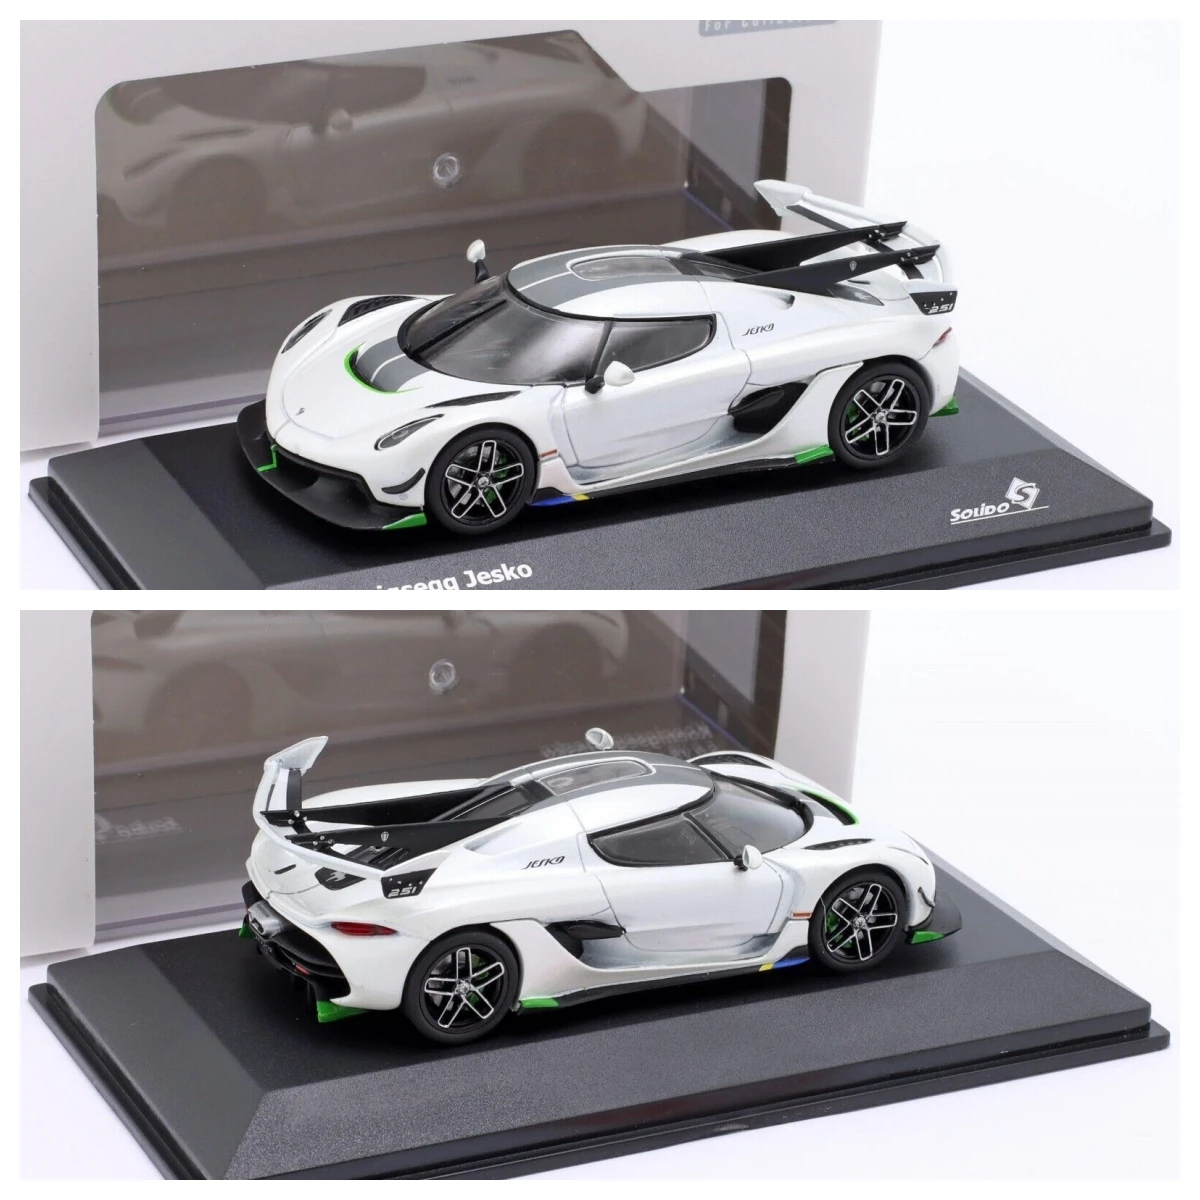 

JESKO 5.0 V8 (1599HP) 2021 Pearl White - 1/43 - SOLIDO Diecast scale Model Gift Model Car Collection Limited Edition Hobby Toys